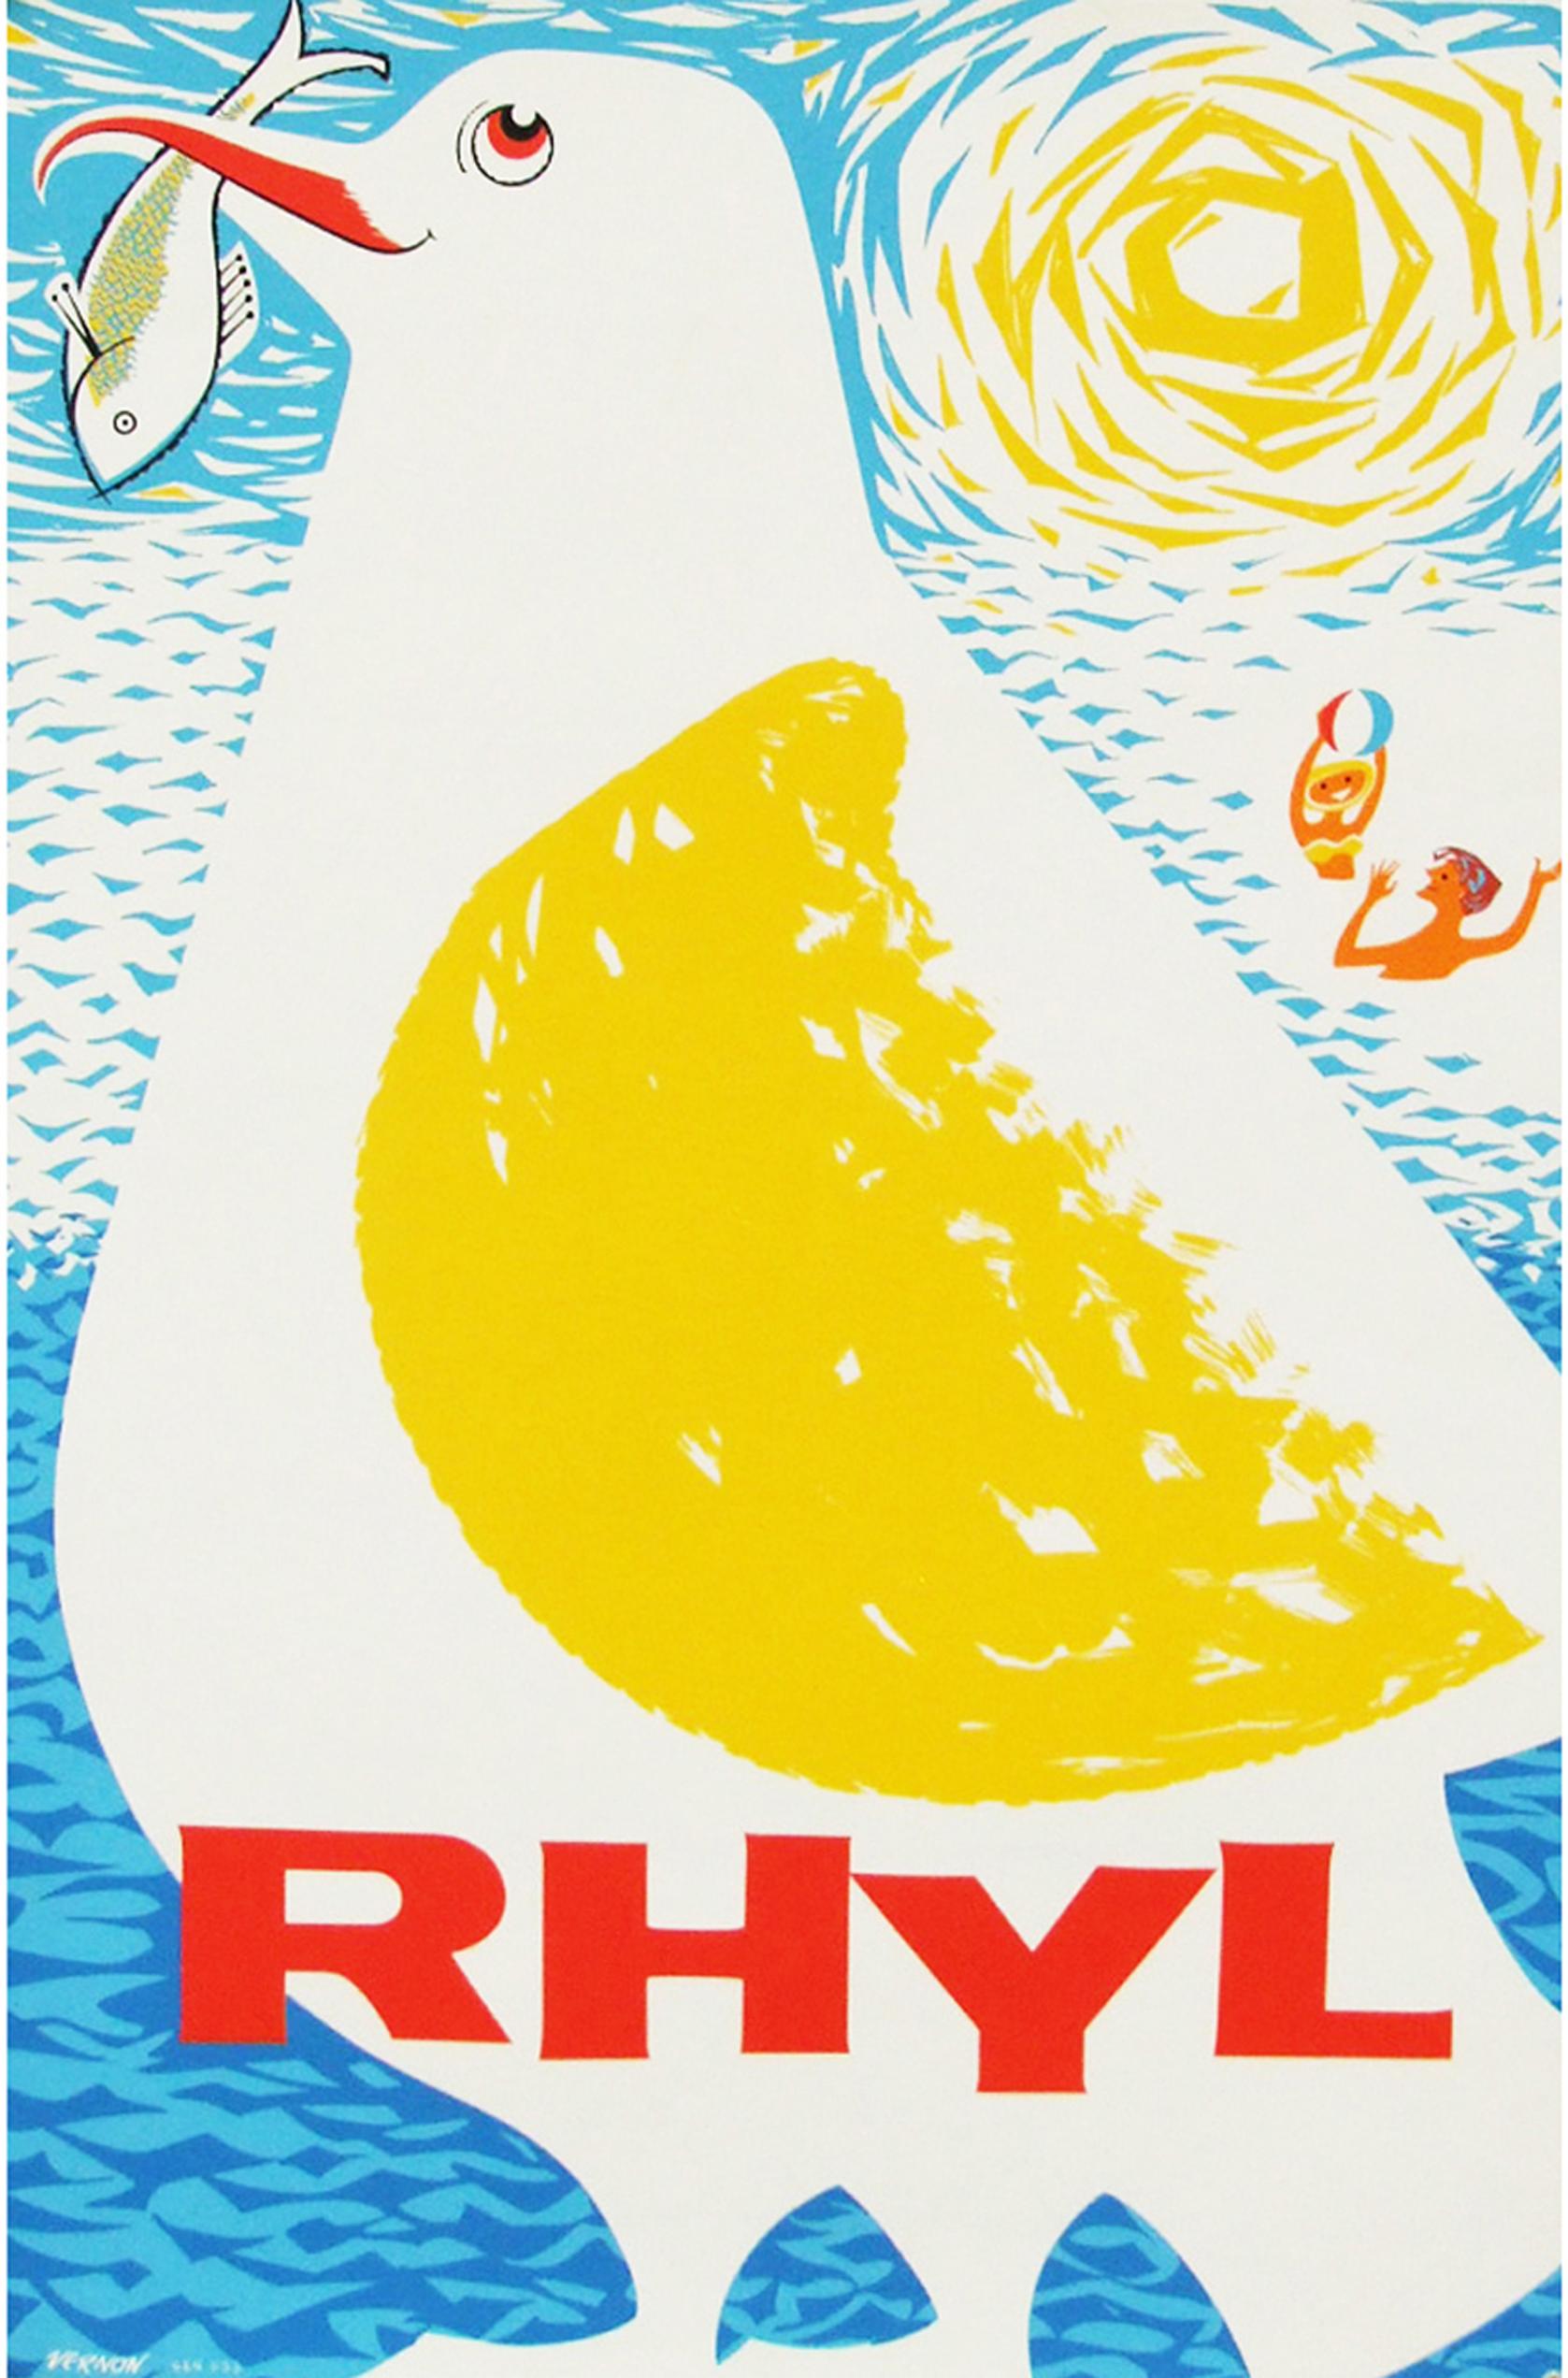 1960s promotional travel poster for Rhyl, Wales designed by Vernon, UK. Rolled.

Measures: L 76cm x W 50.5cm.